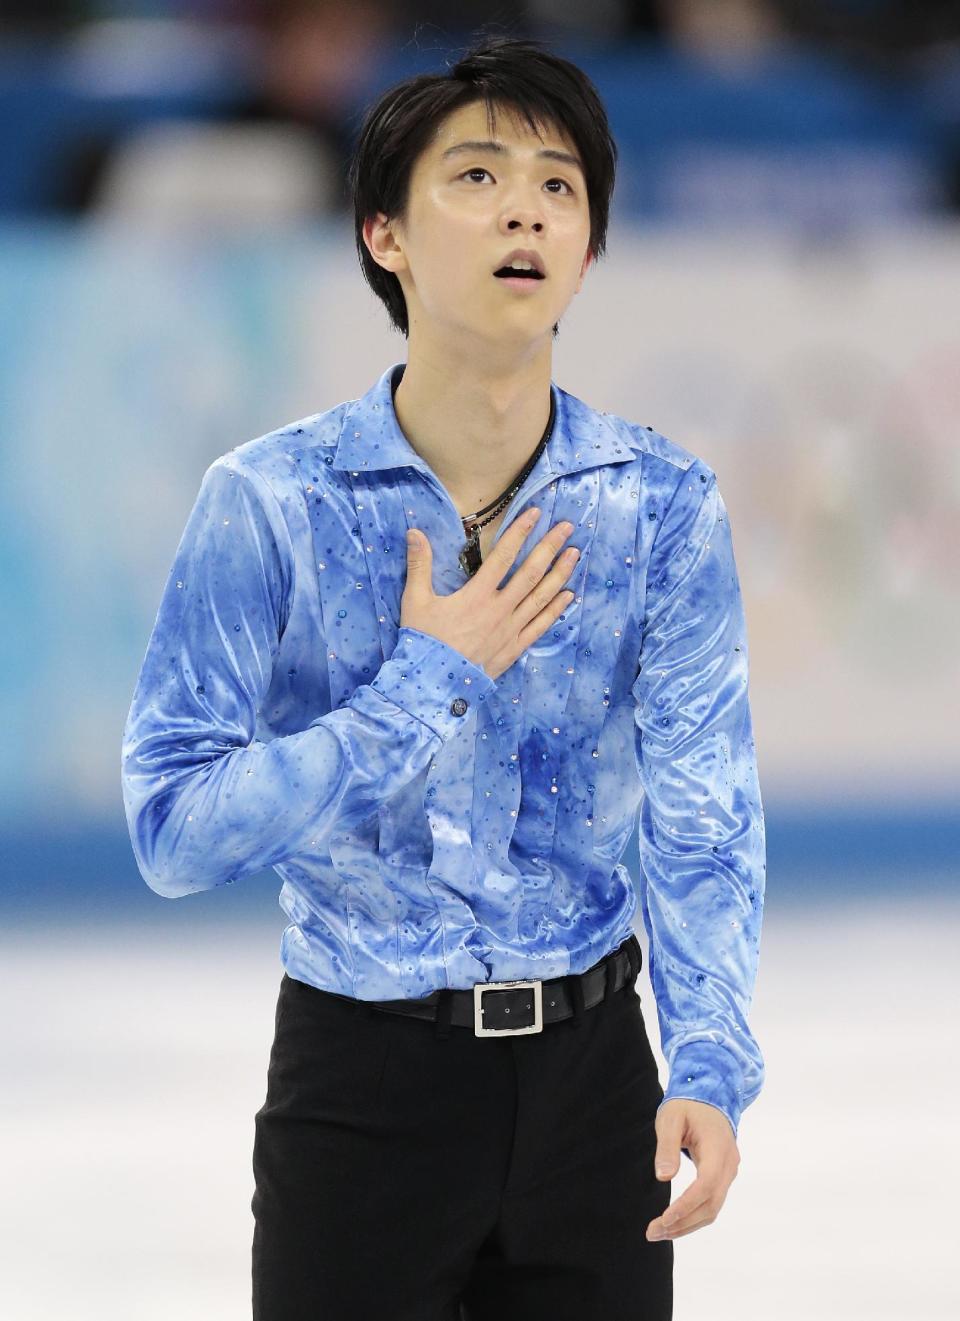 Yuzuru Hanyu of Japan gestures after competing in the men's team short program figure skating competition at the Iceberg Skating Palace during the 2014 Winter Olympics, Thursday, Feb. 6, 2014, in Sochi, Russia. (AP Photo/Ivan Sekretarev)